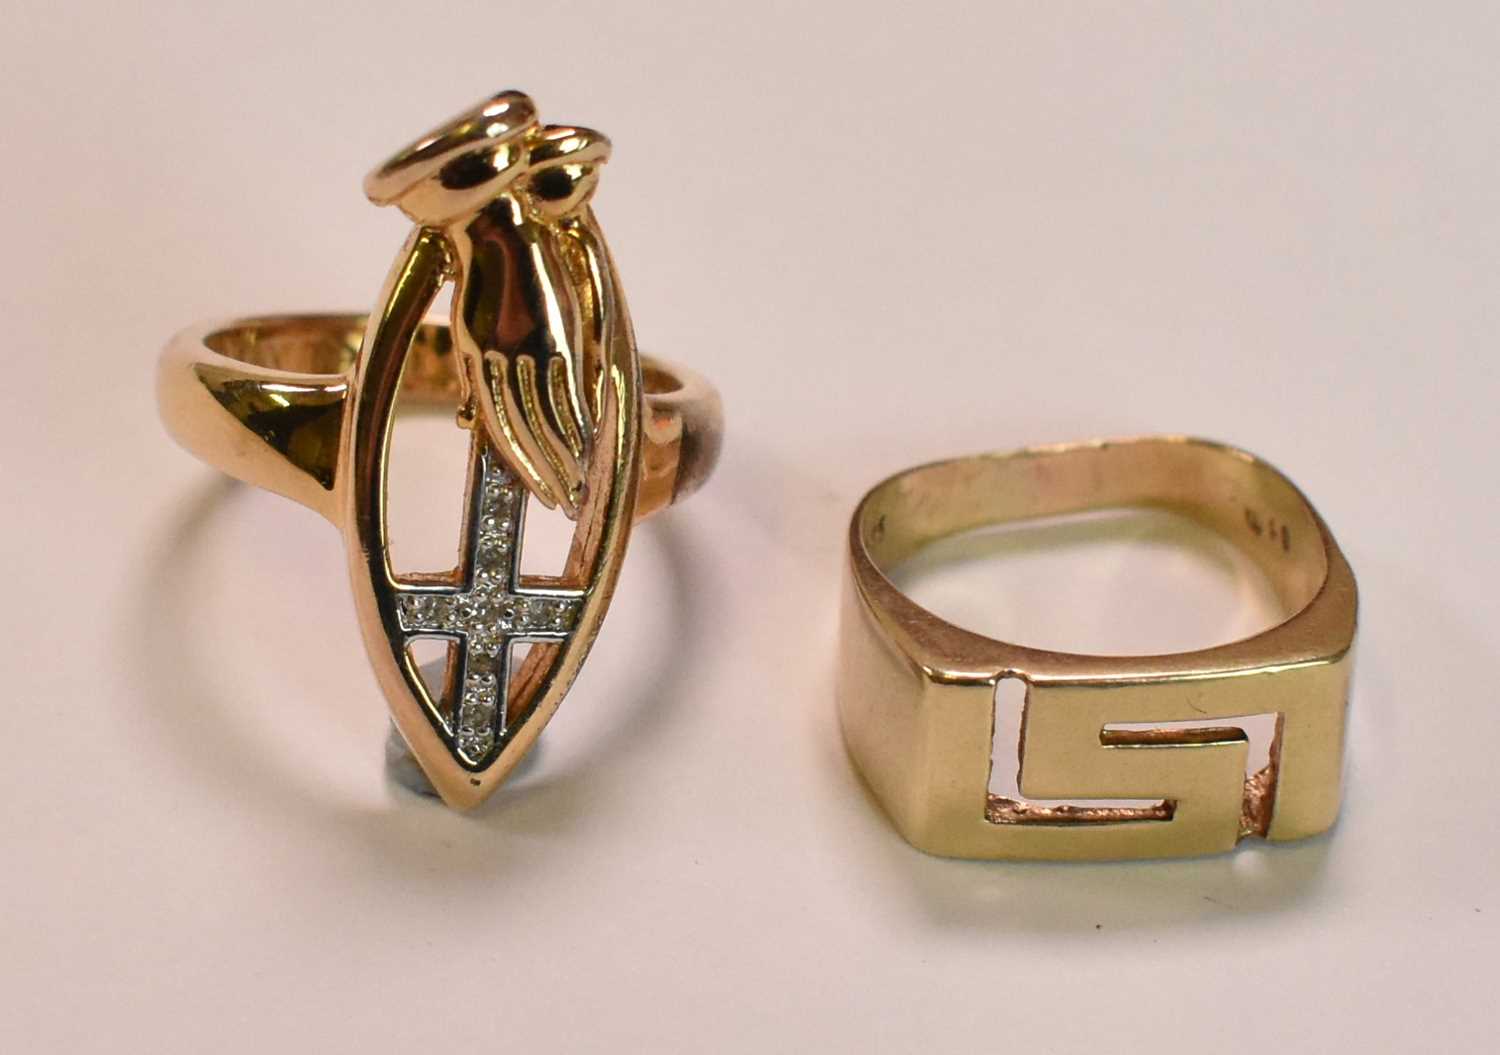 A 14ct yellow gold Greek key designed ring, size J 1/2, approx 3.2g, and a yellow metal ring